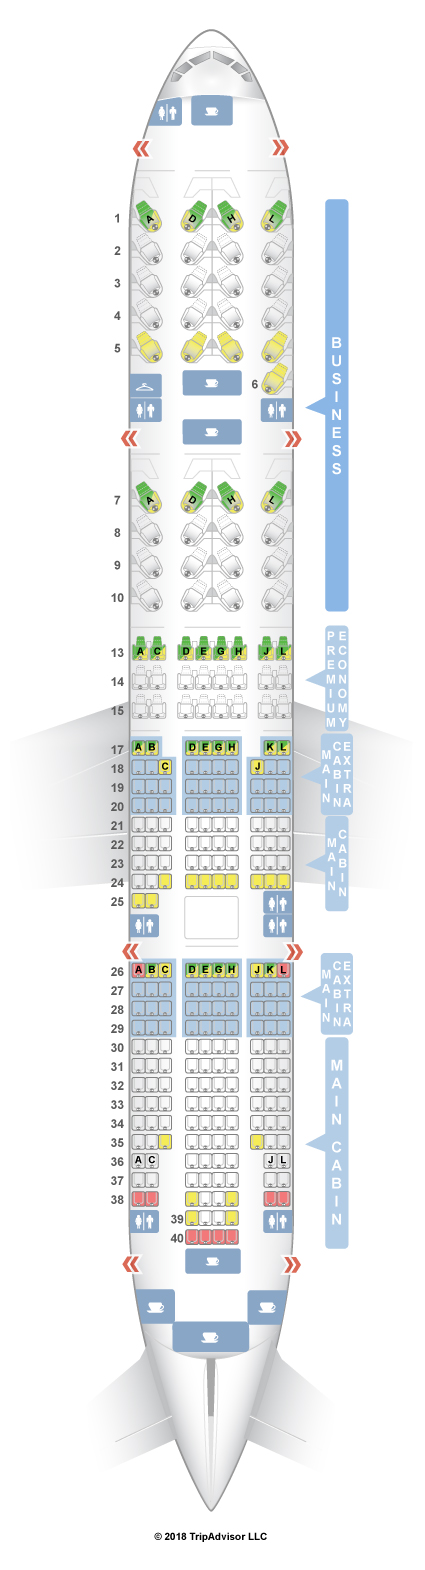 seat map 777 200 american airlines